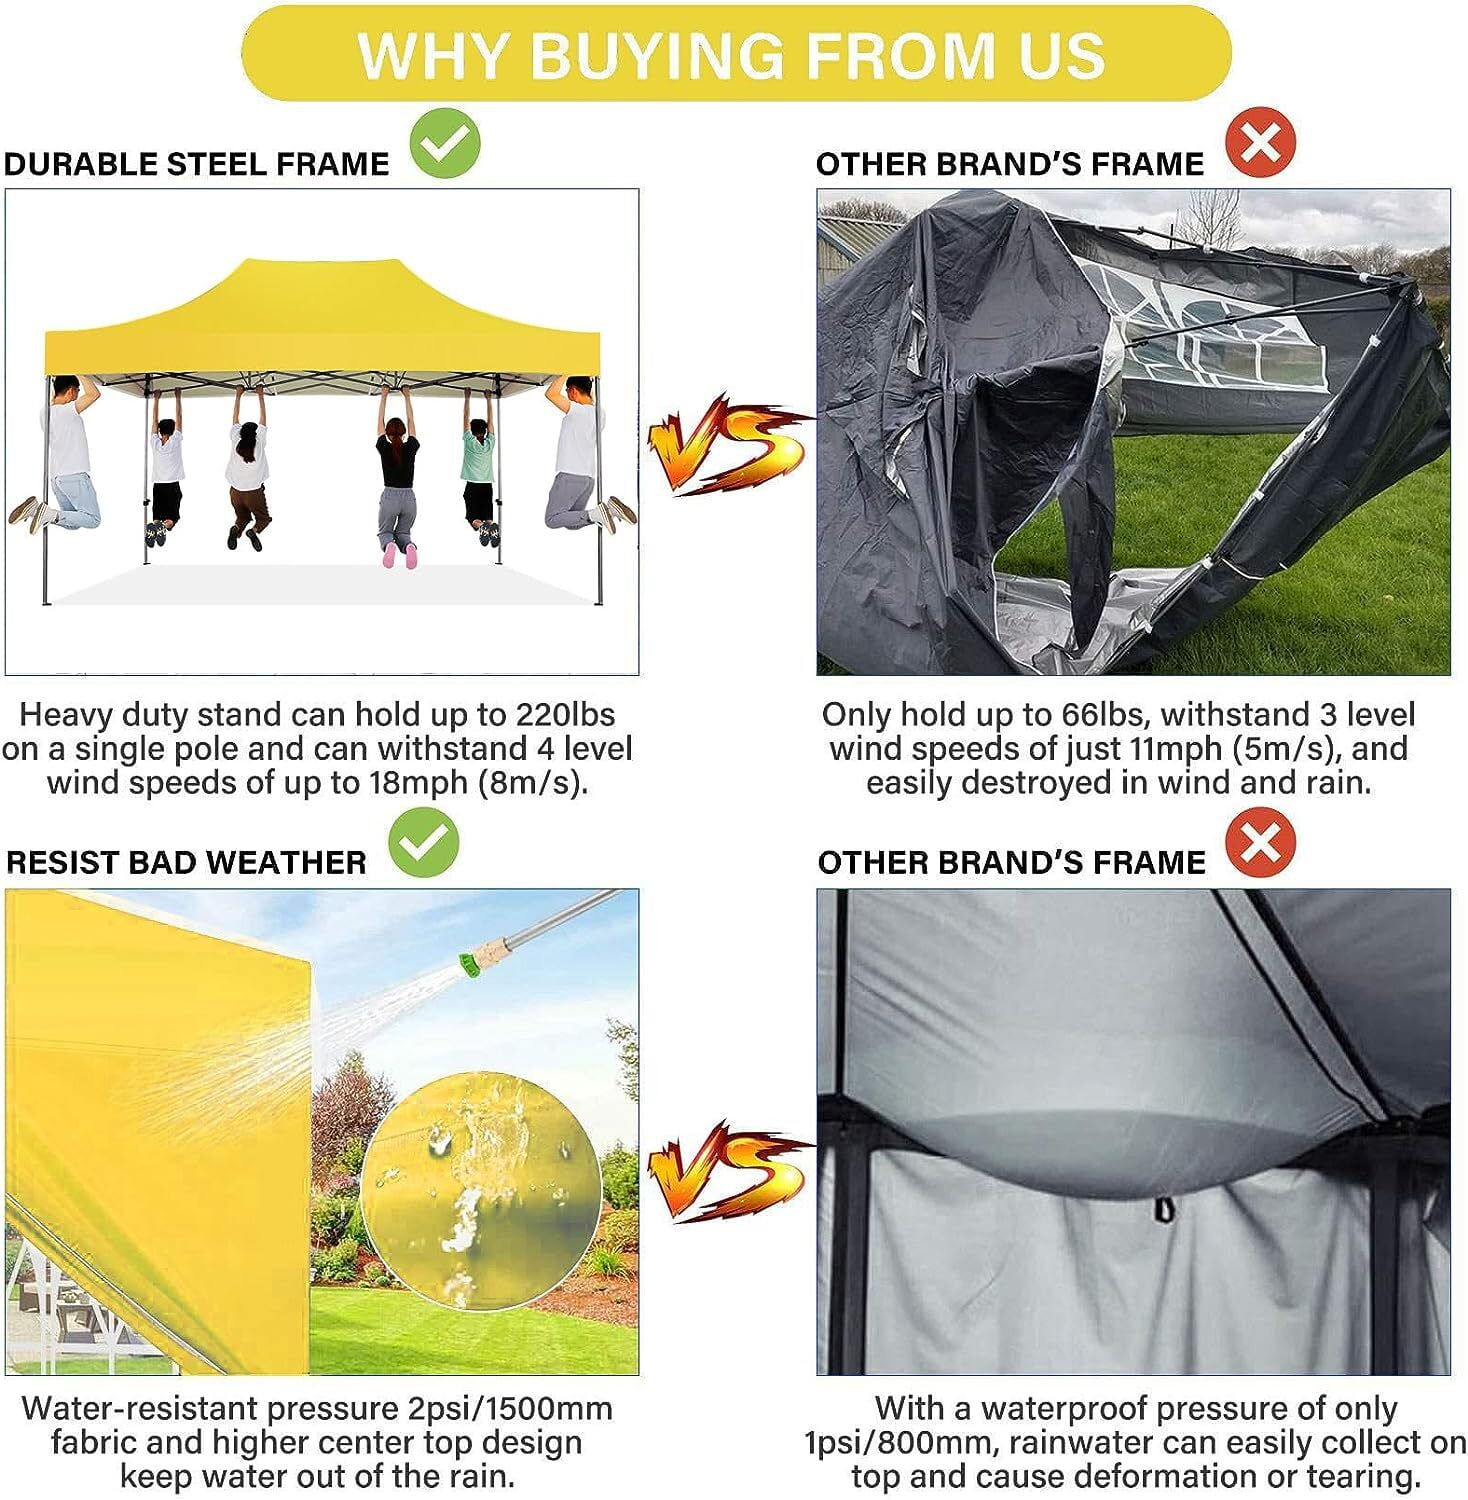 COBIZI 10x15 Pop up Canopy Commercial Heavy Duty Canopy Tent with 4 Si –  CAROMA